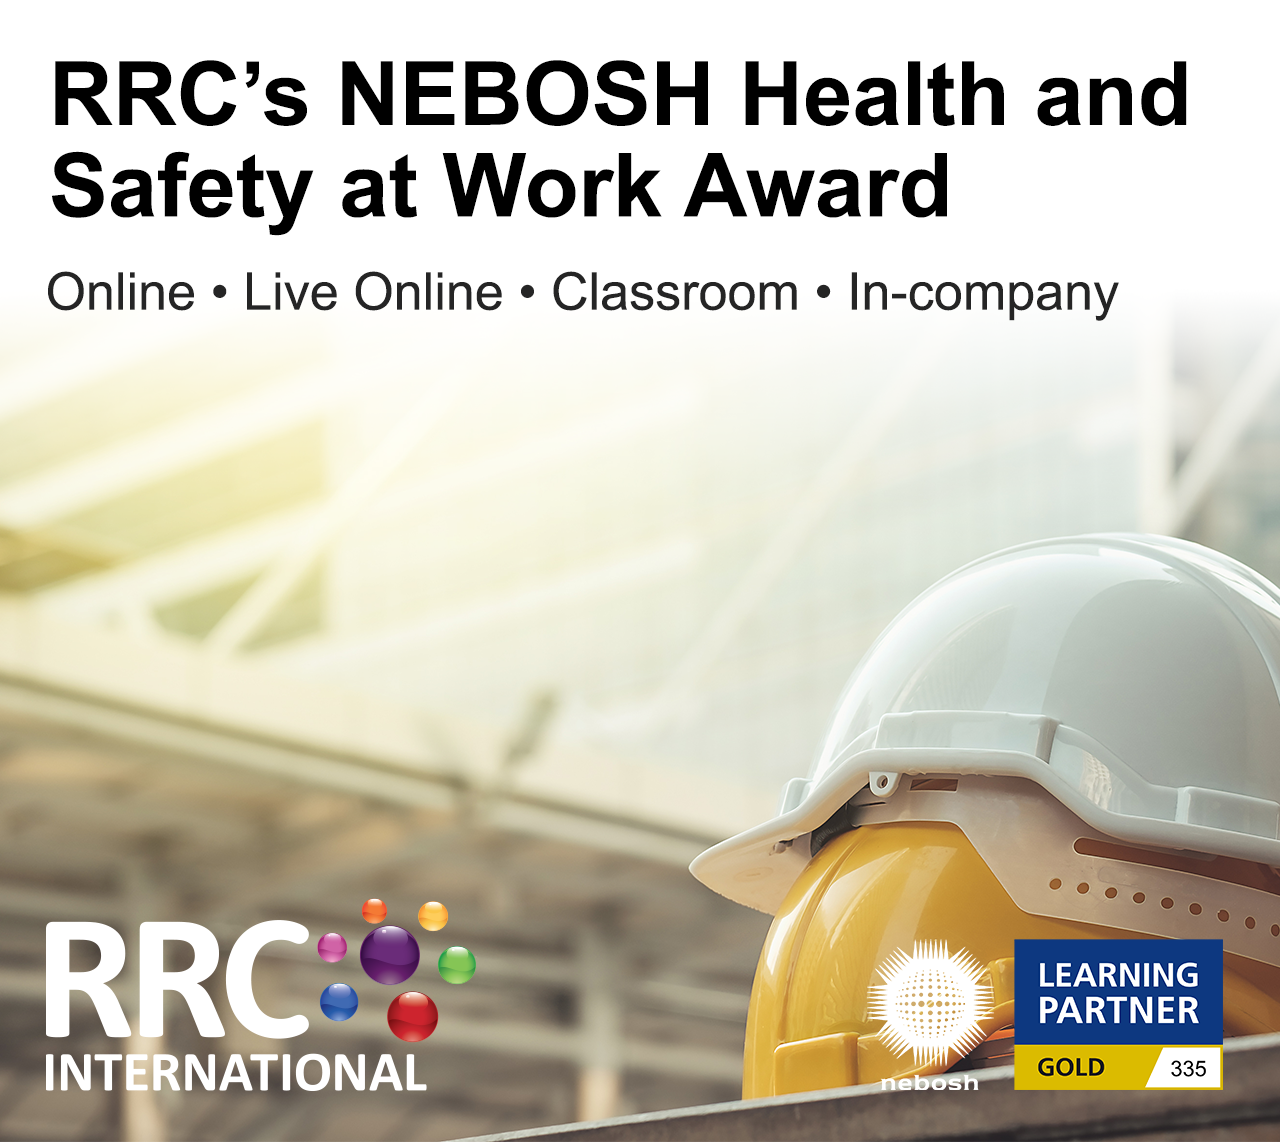 RRC's NEBOSH Health and Safety at Work Award